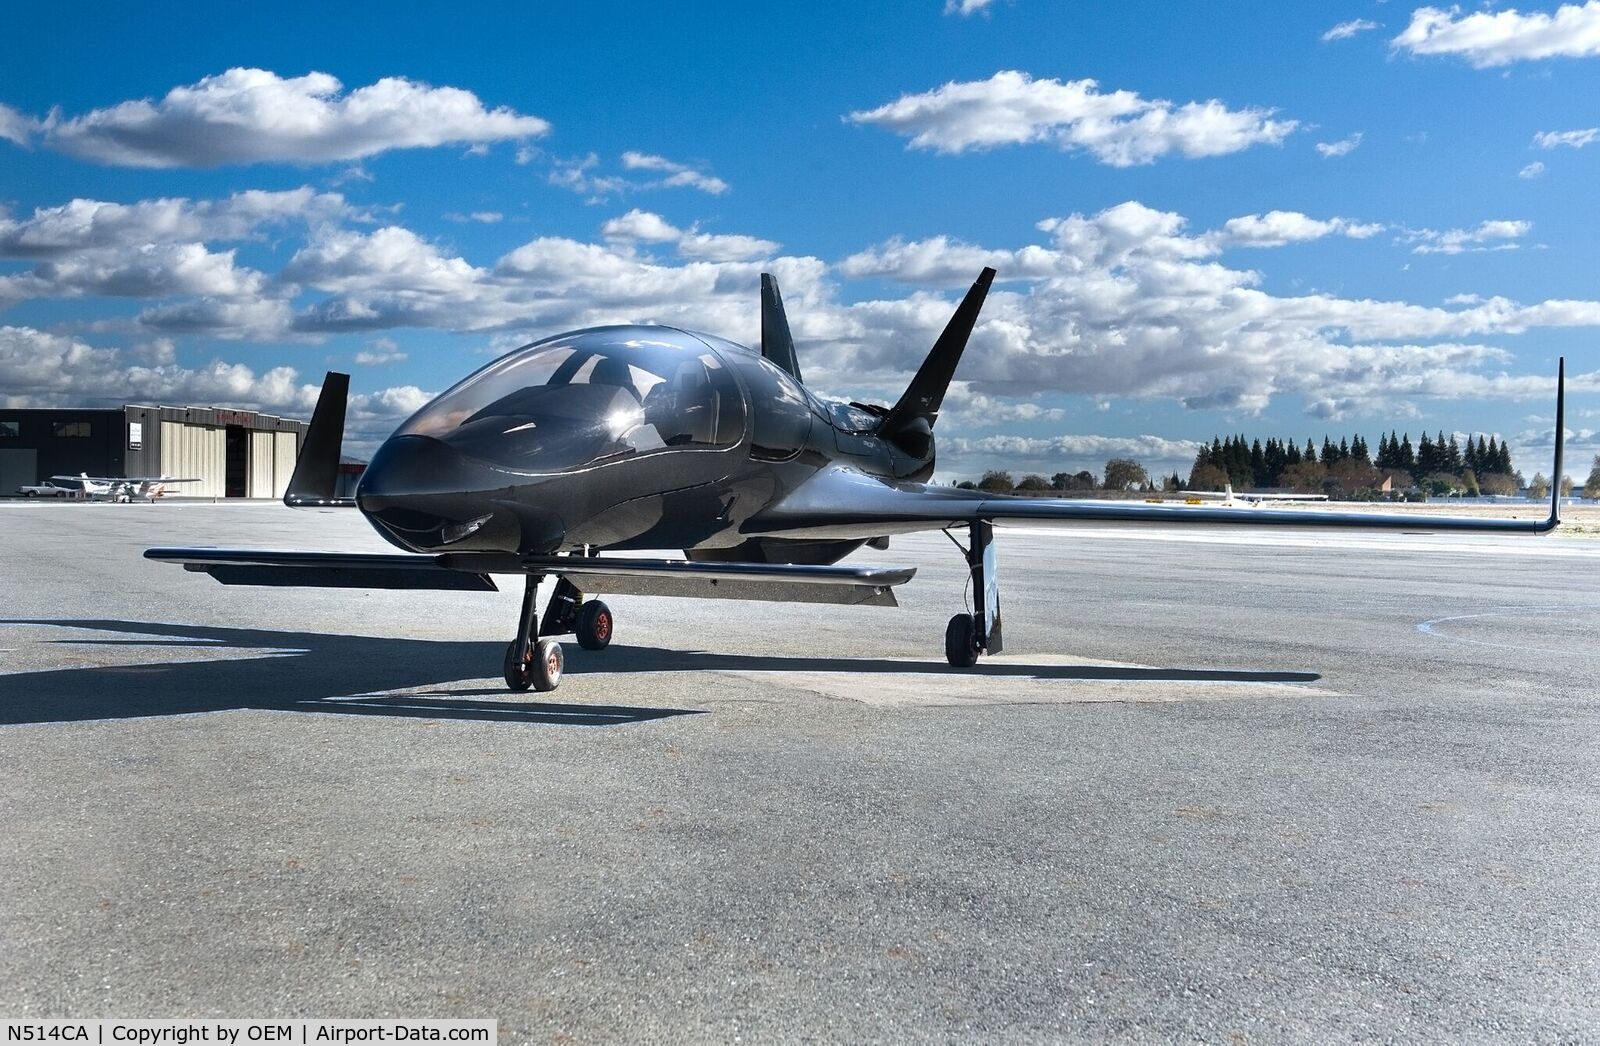 N514CA, 2014 COBALT AIRCRAFT CO50 VALKYRIE C/N PX02, prototype